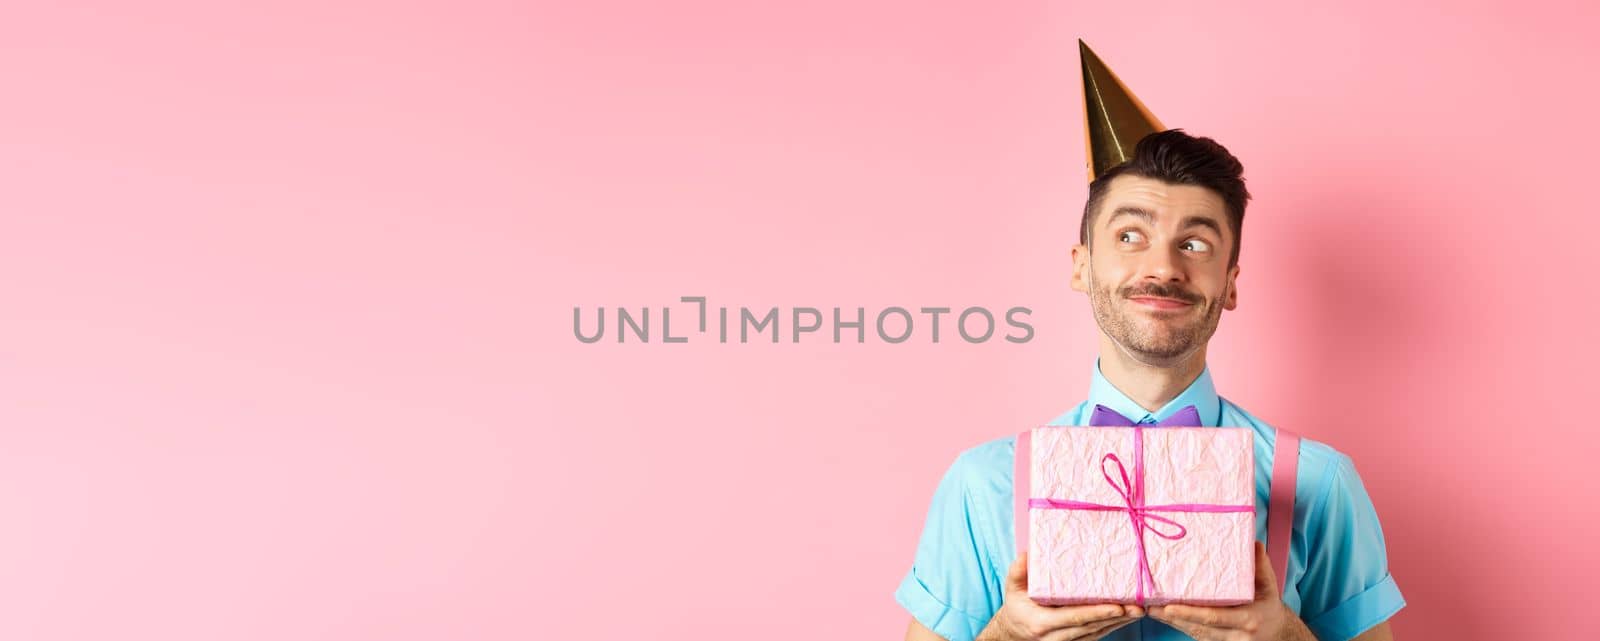 Holidays and celebration concept. Silly guy with moustache and bow-tie, wearing party hat, receive birthday gift and looking dreamy aside, standing over pink background.